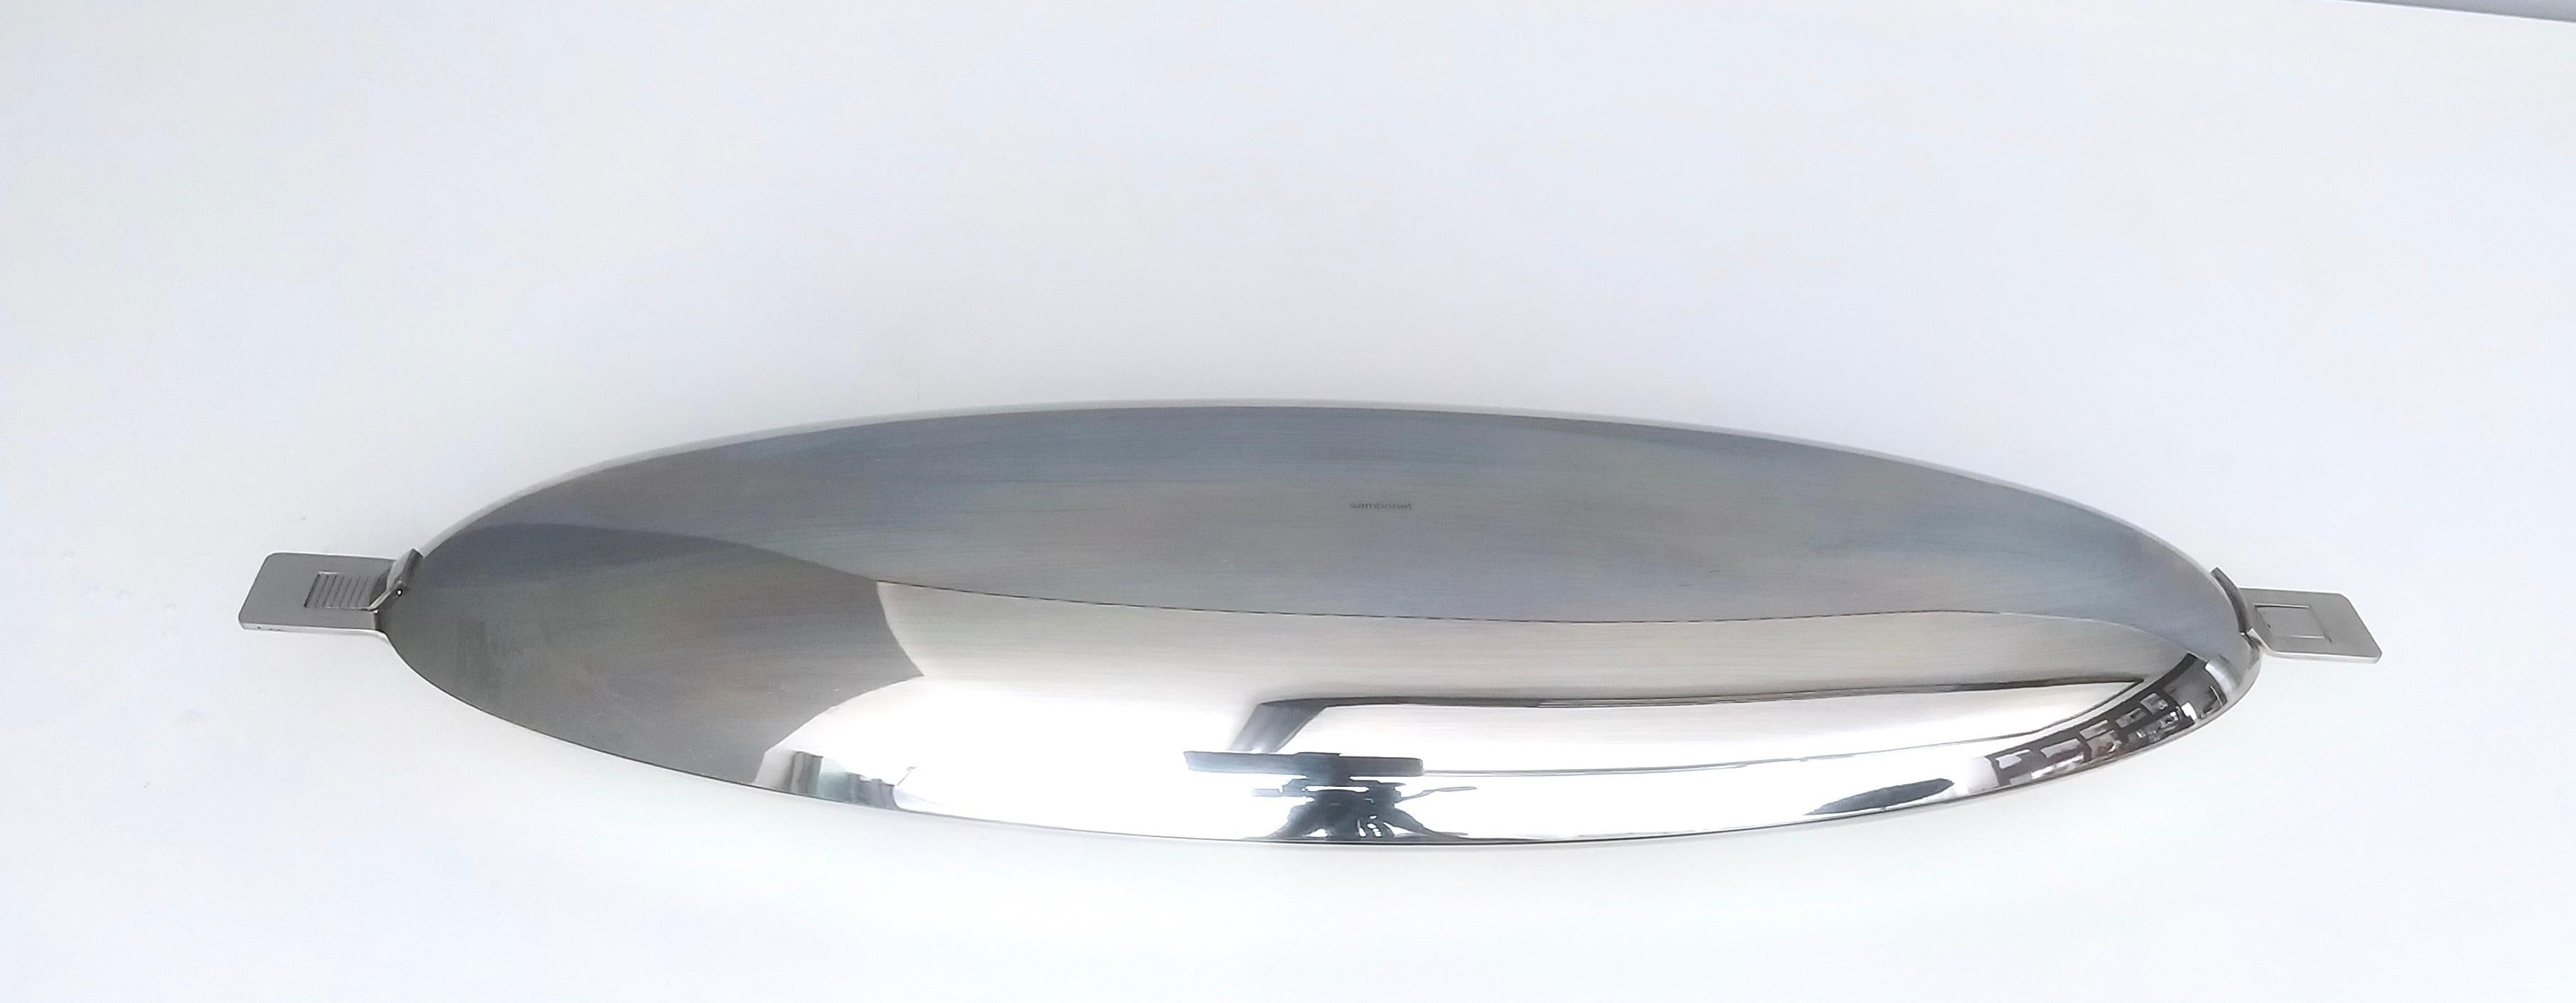 Post-Modern Roberto Sambonet Stainless Steel Fish Poacher with a 1960s Design, Italy, 1980s For Sale